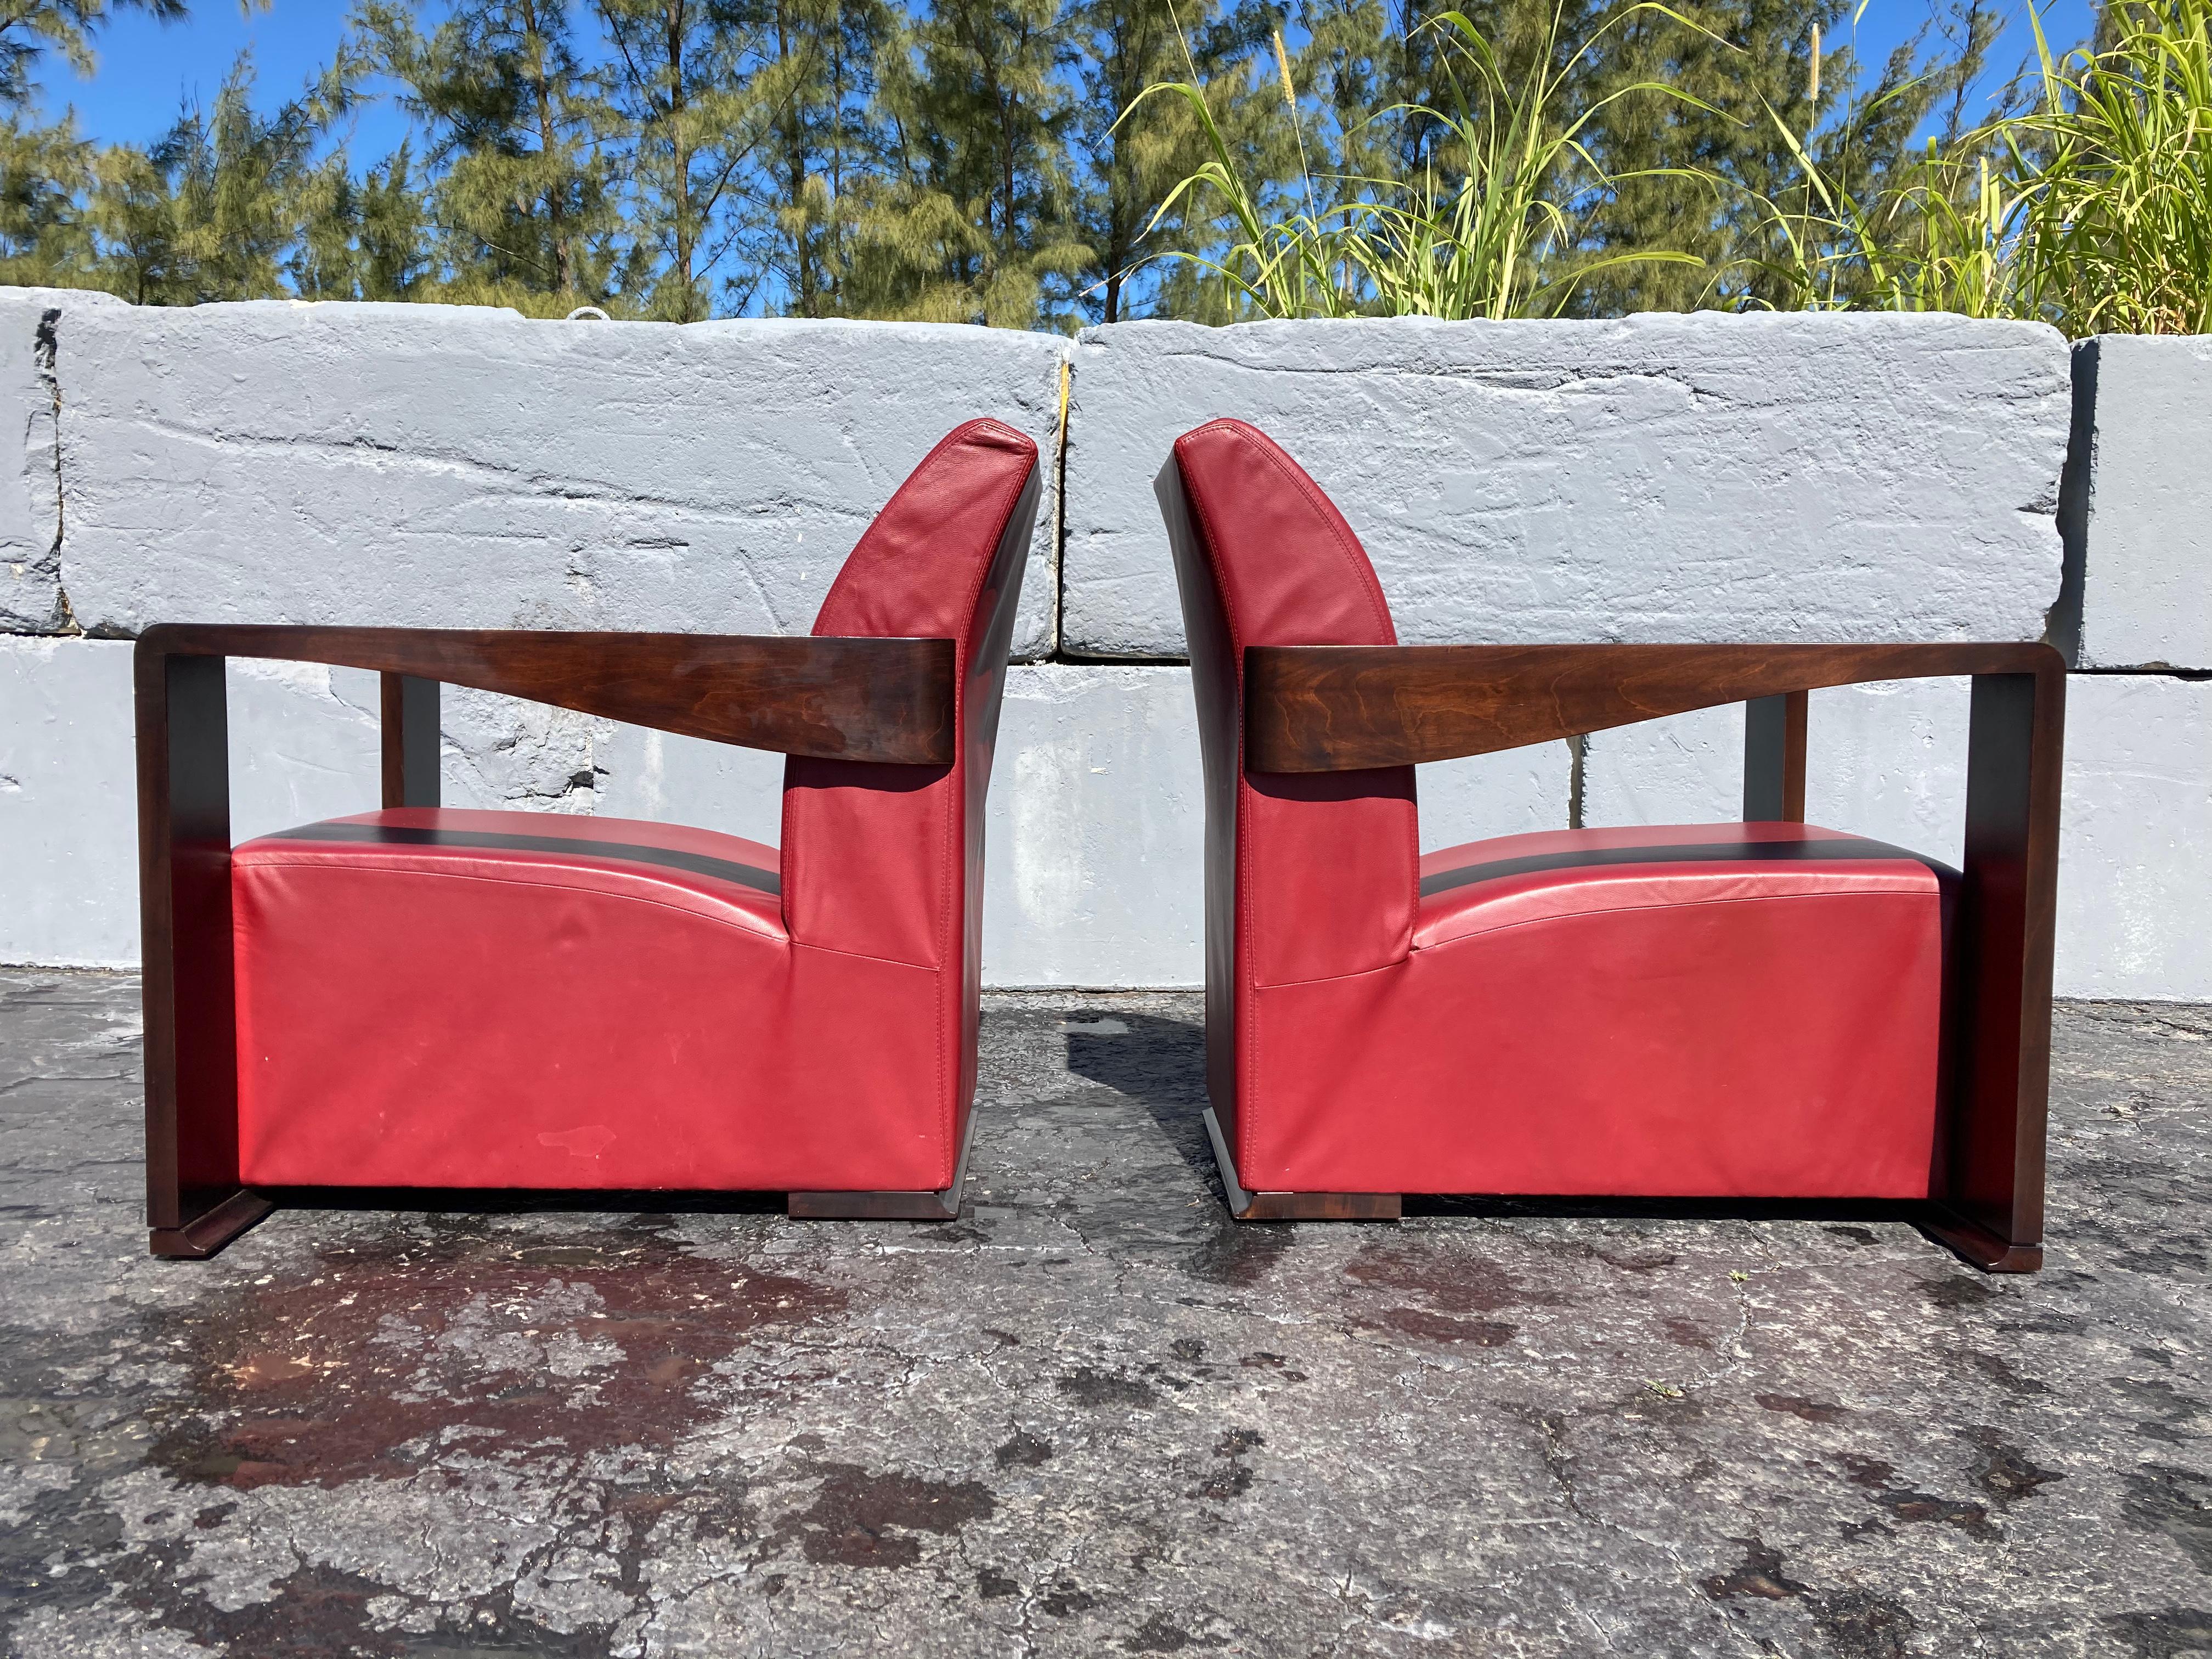 Art Deco style lounge chairs, red leather and wood veneer. Leather and wood has some normal wear.